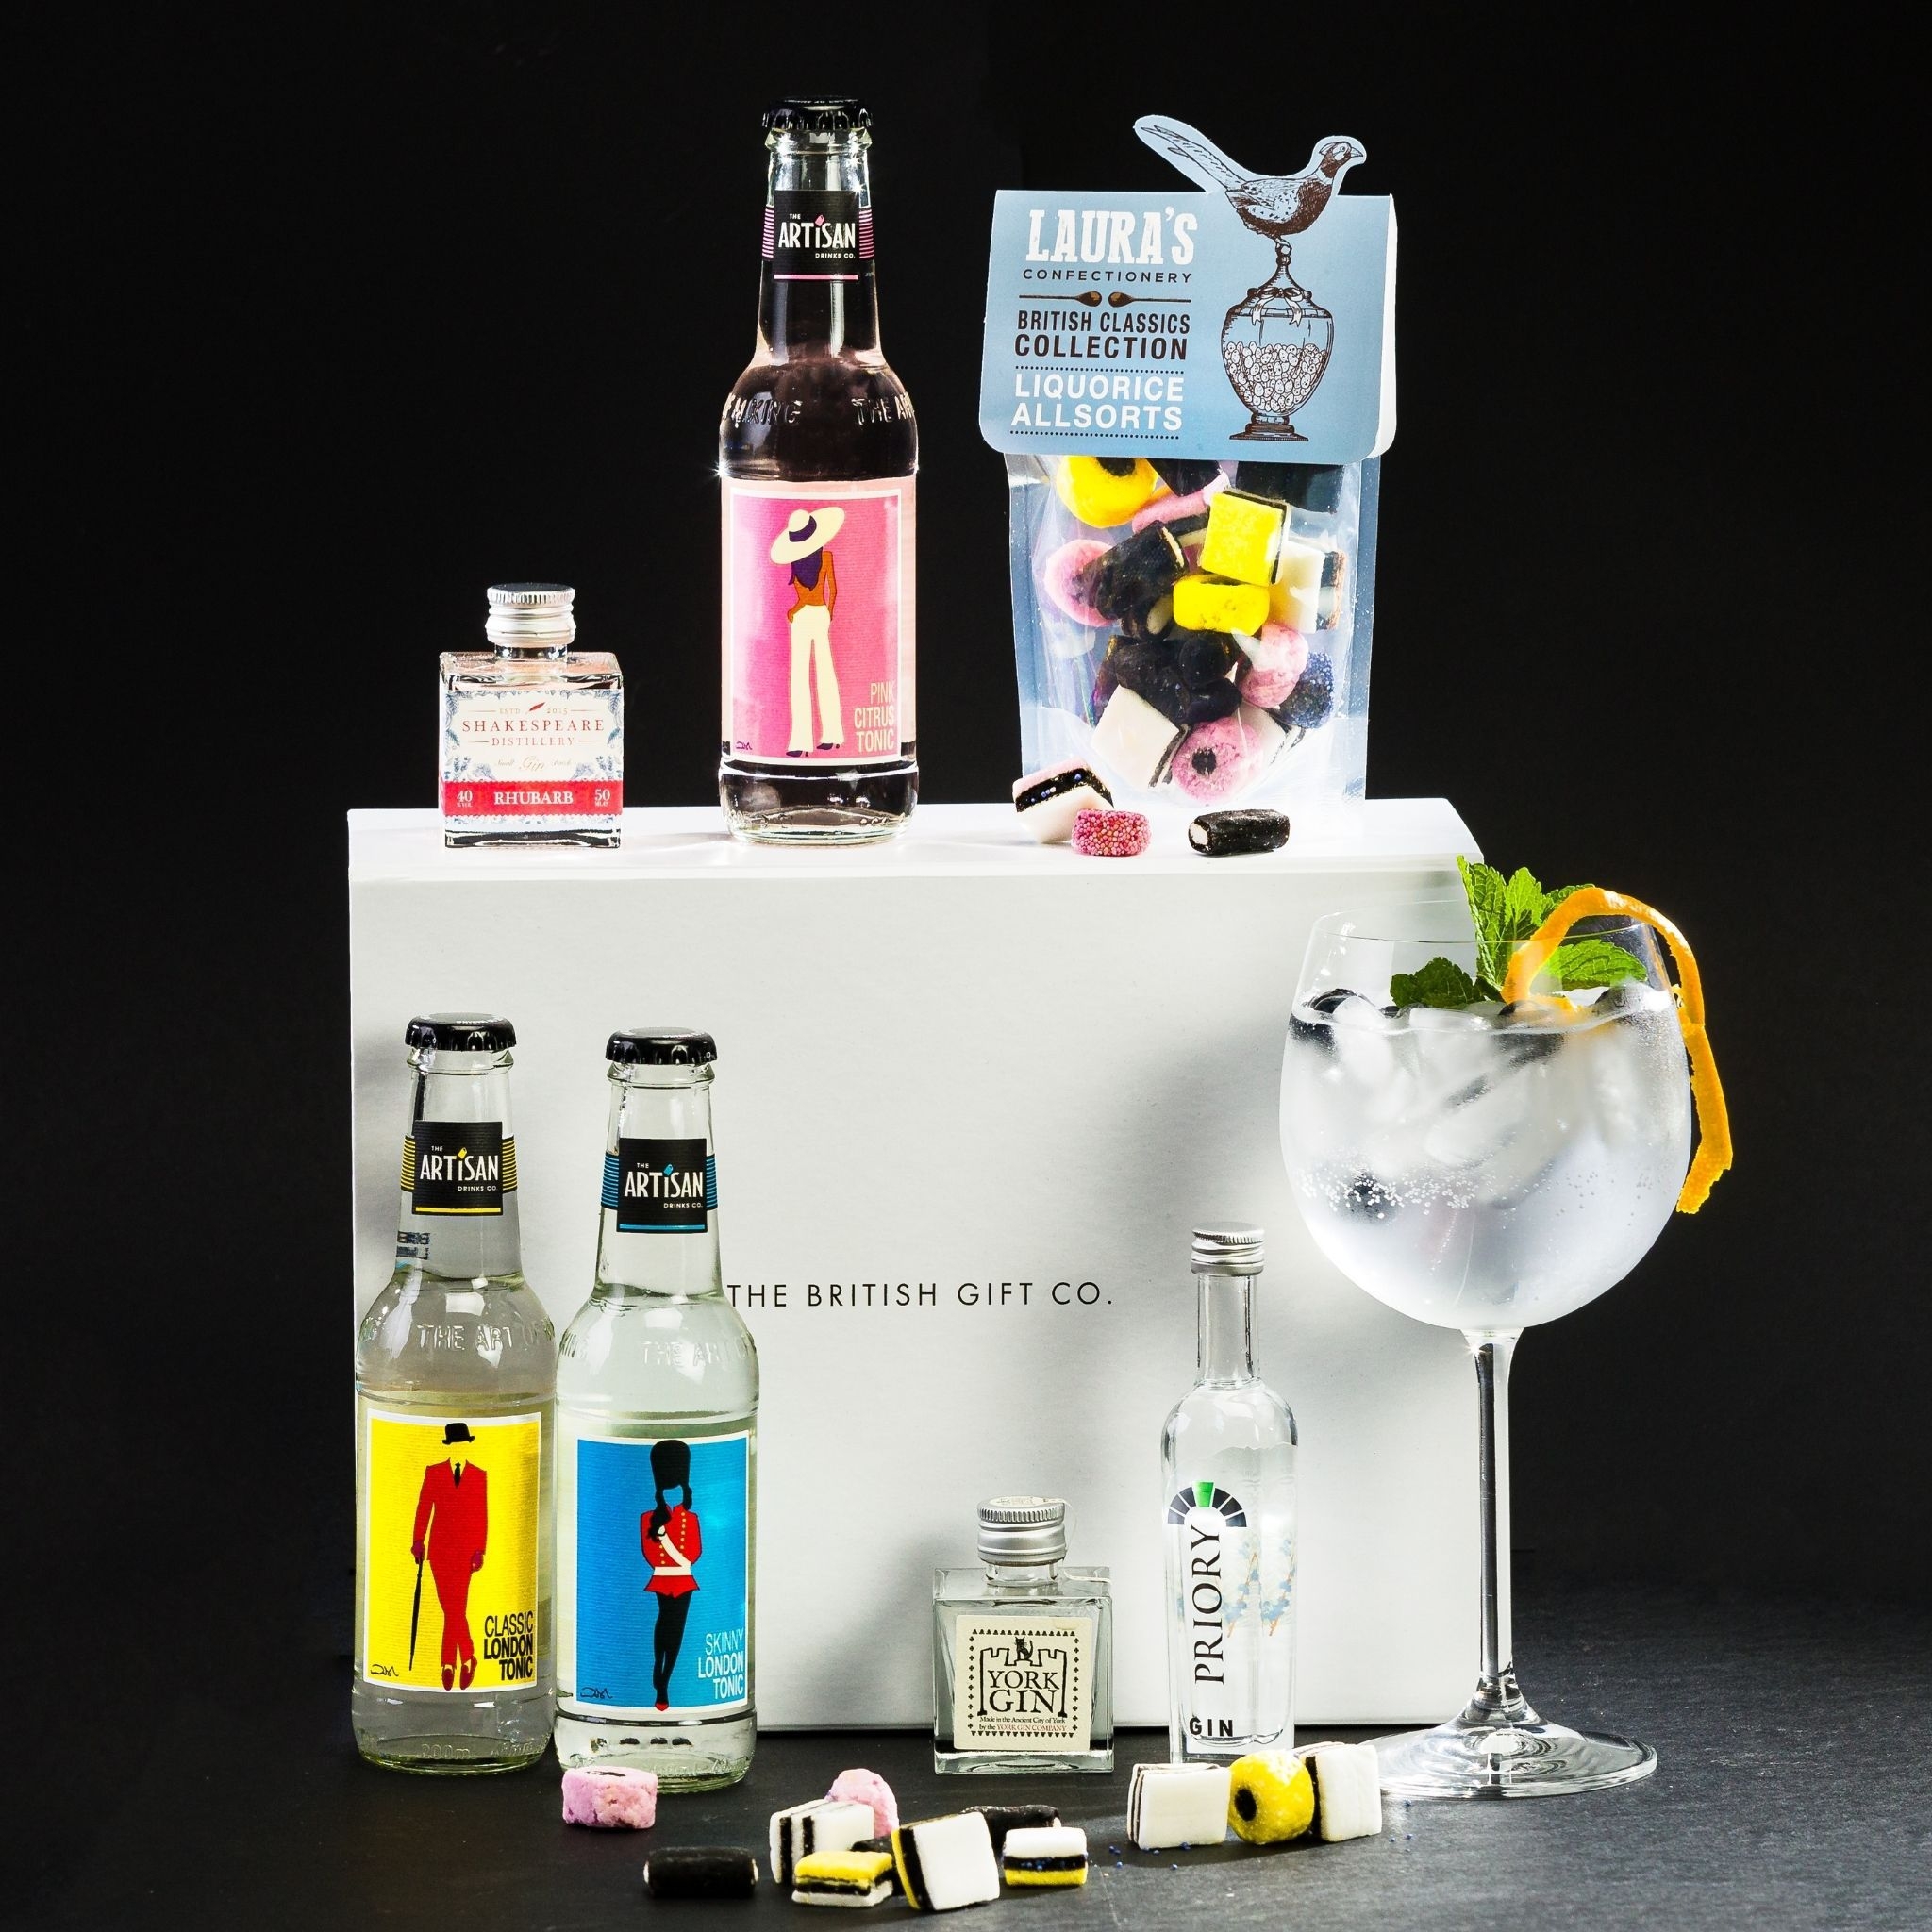 Miniature Gin Gift Set with a Rhubarb Taster, Tonics and Sweets – The British Gift Co.